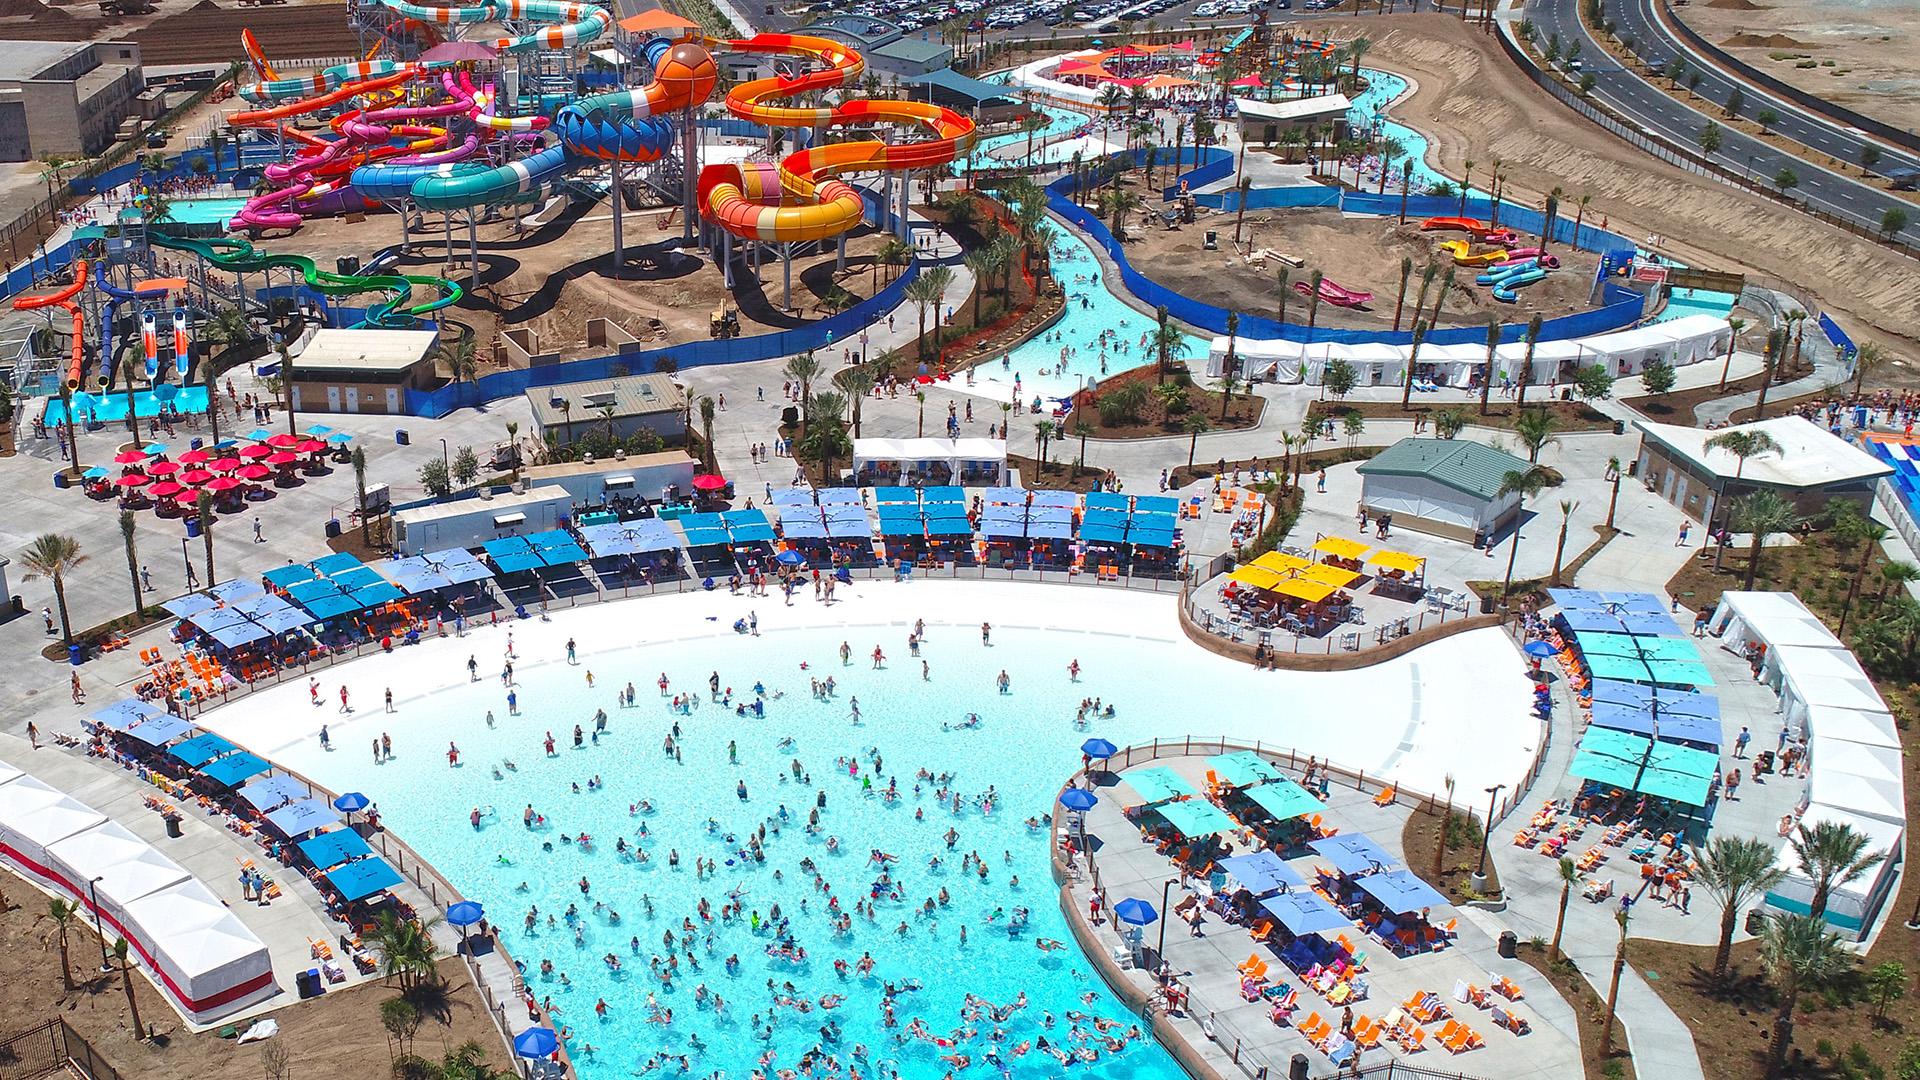 HD Tour] Full Tour Overview of Wet n Wild Las Vegas - Newest Water Park 